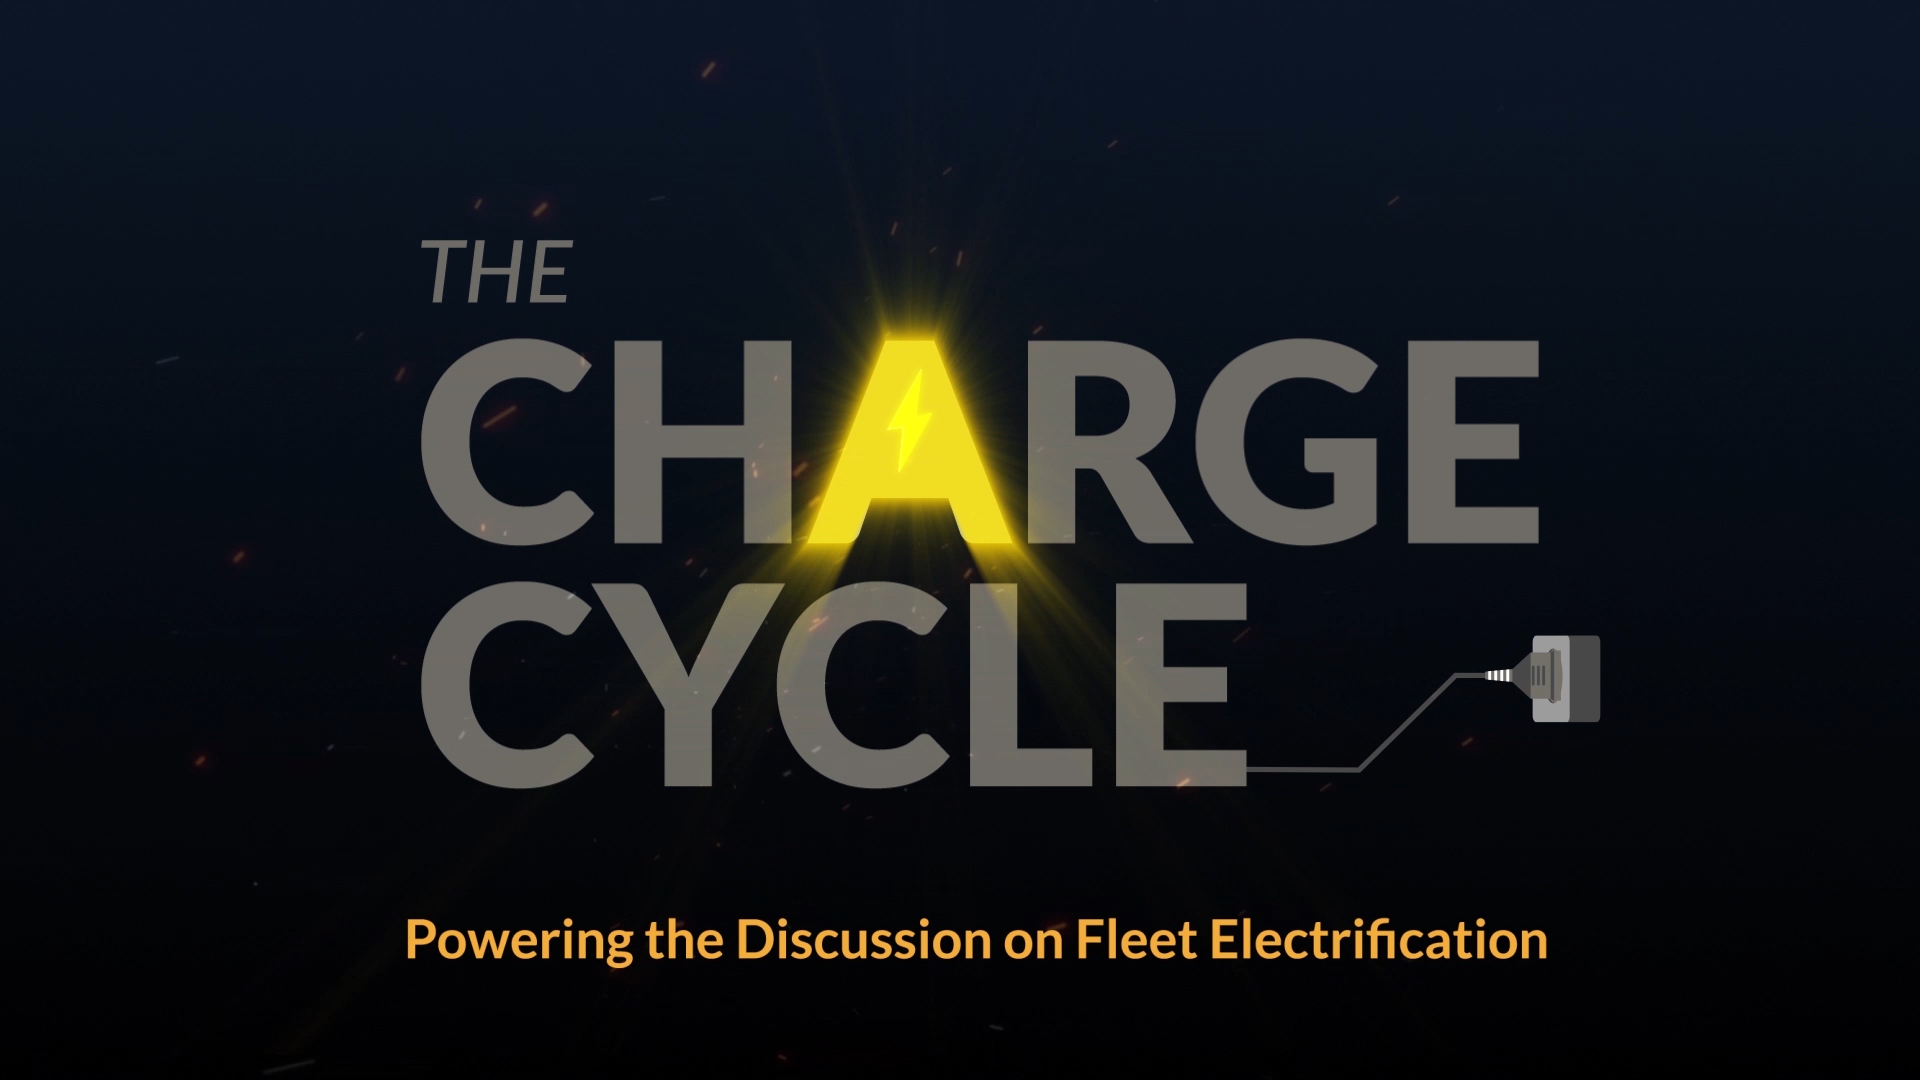 The Charge Cycle Podcast - Powering the discussion on fleet electrification. Hosted by Todd Trauman, CEO of e-Mission Control, the podcast will feature clean energy experts and industry veterans to discuss factors driving the electrification transition. The program will cover topics like public funding opportunities, vehicle-readiness and cutting-edge OEM and EVSE technologies, infrastructure, regulatory updates, and more.